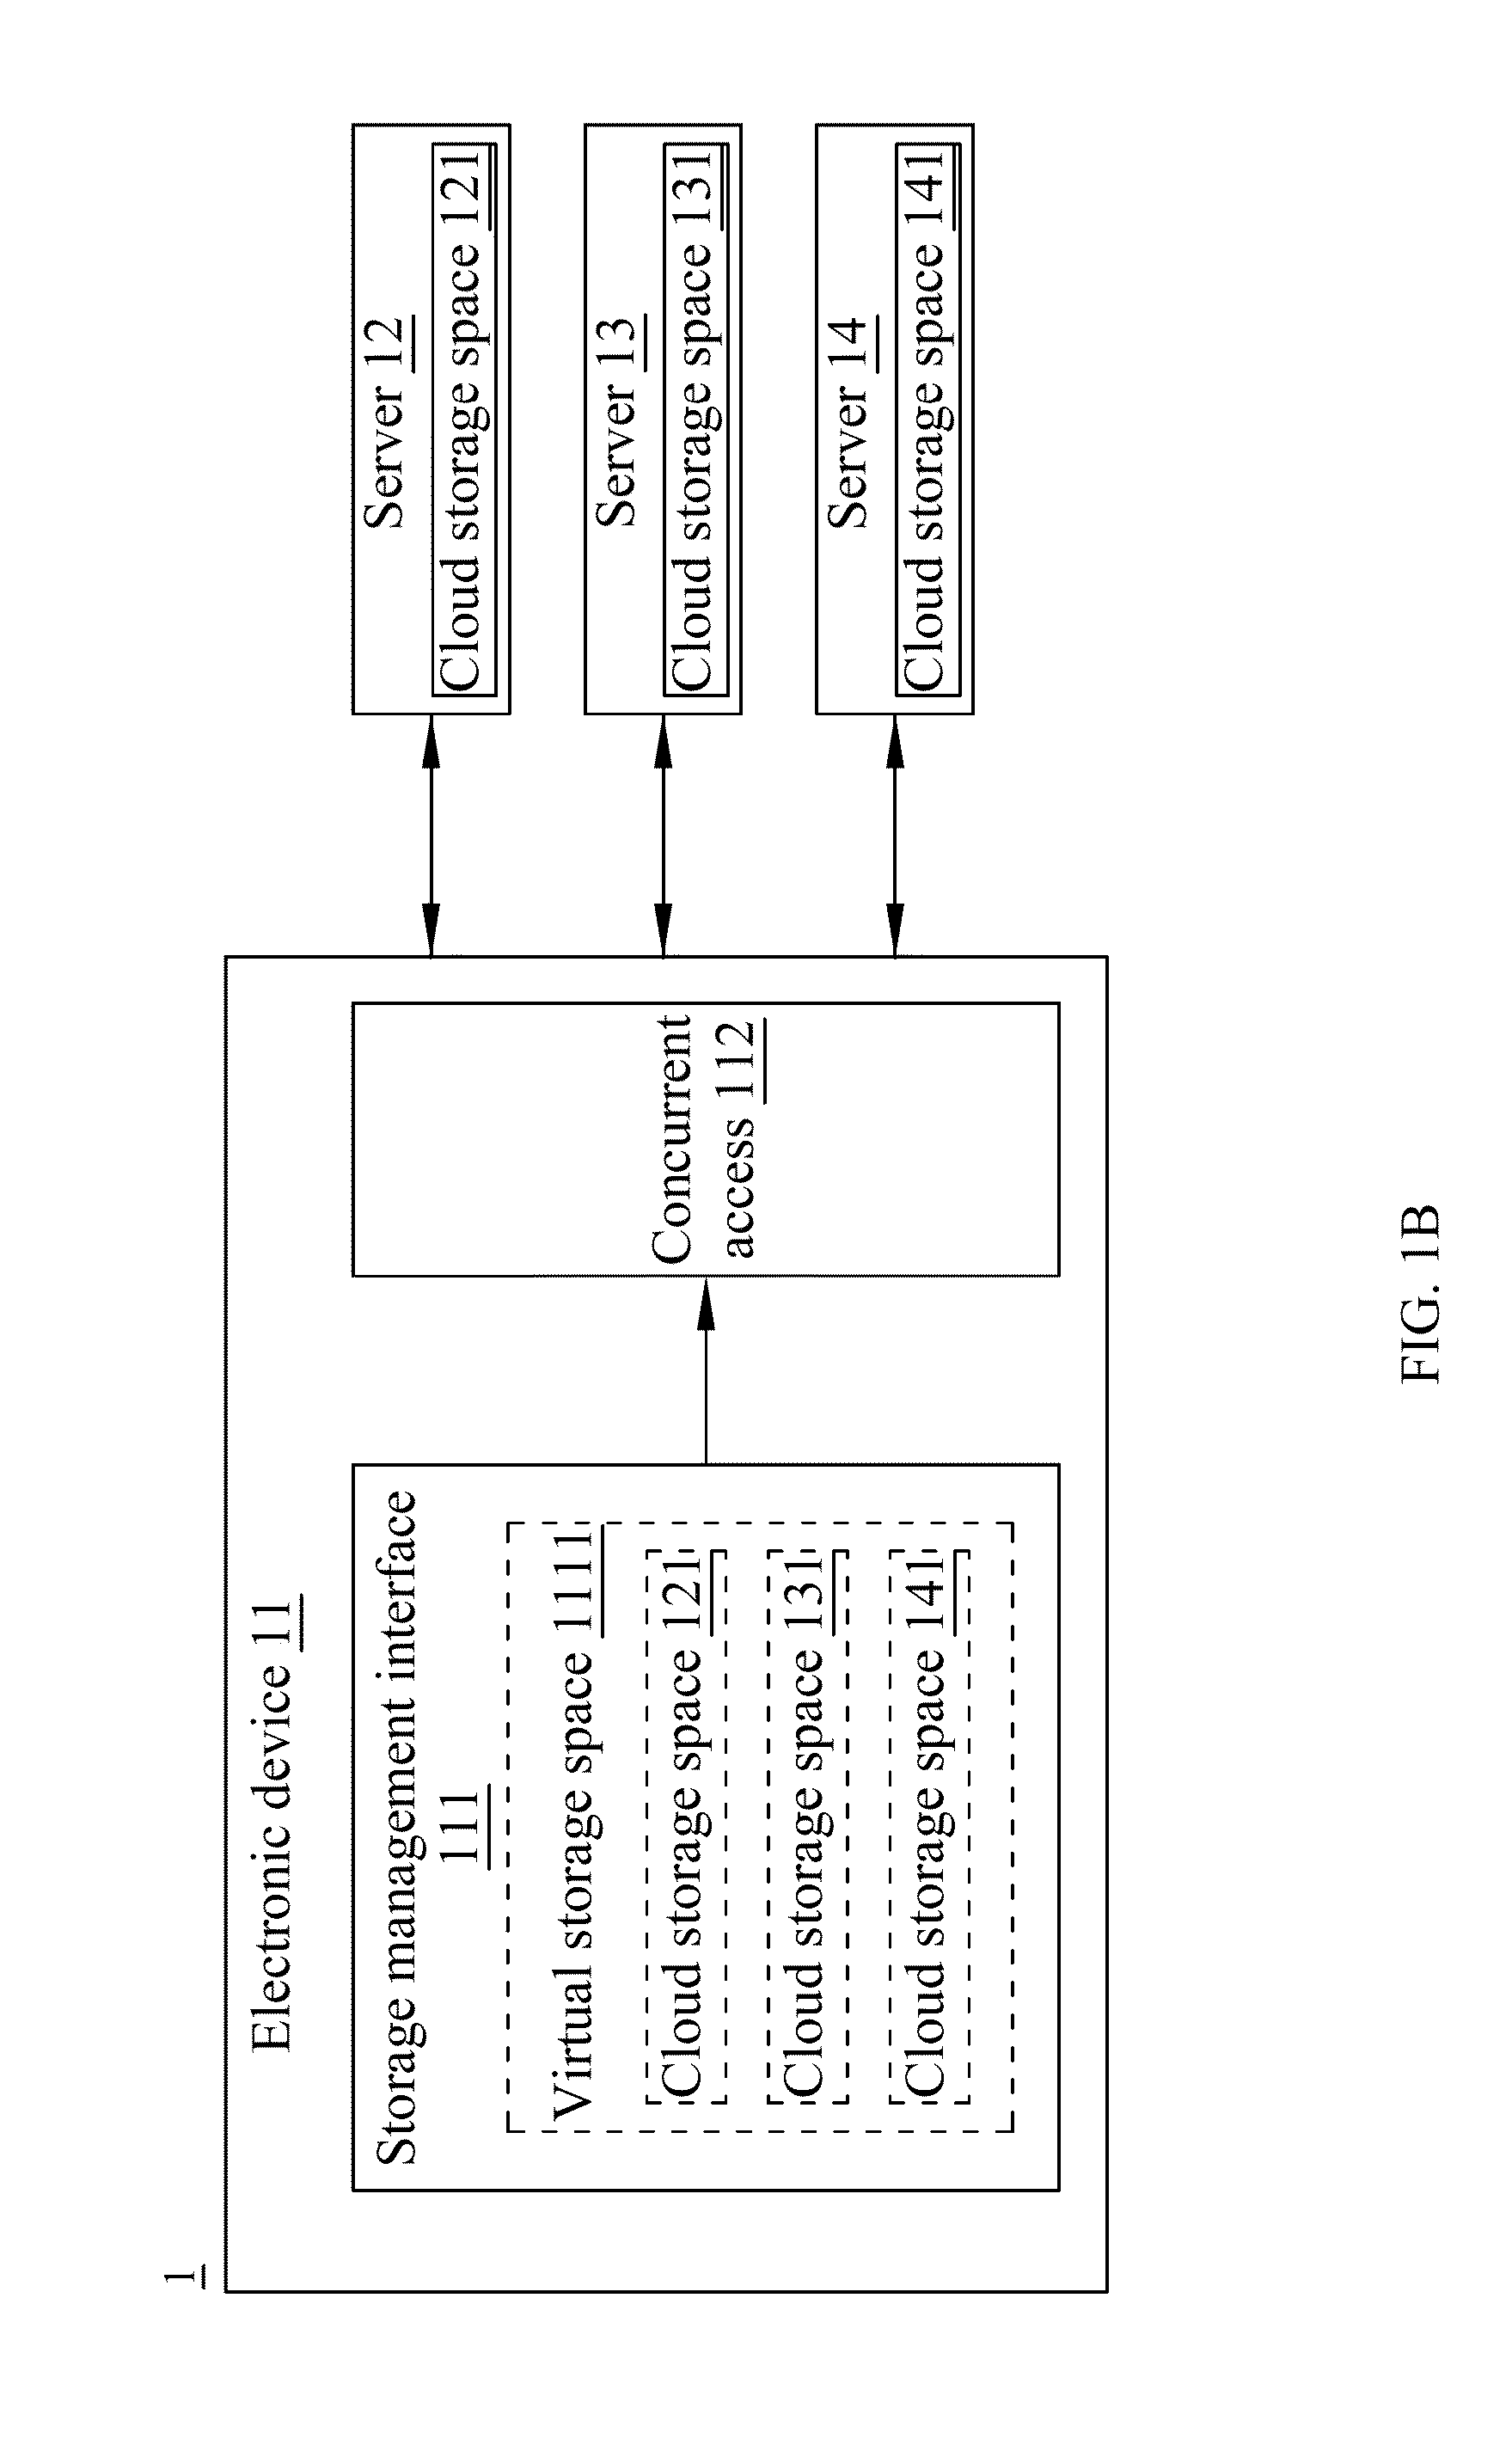 Electronic device, cloud storage system for managing cloud storage spaces, method and tangible embodied computer readable medium thereof